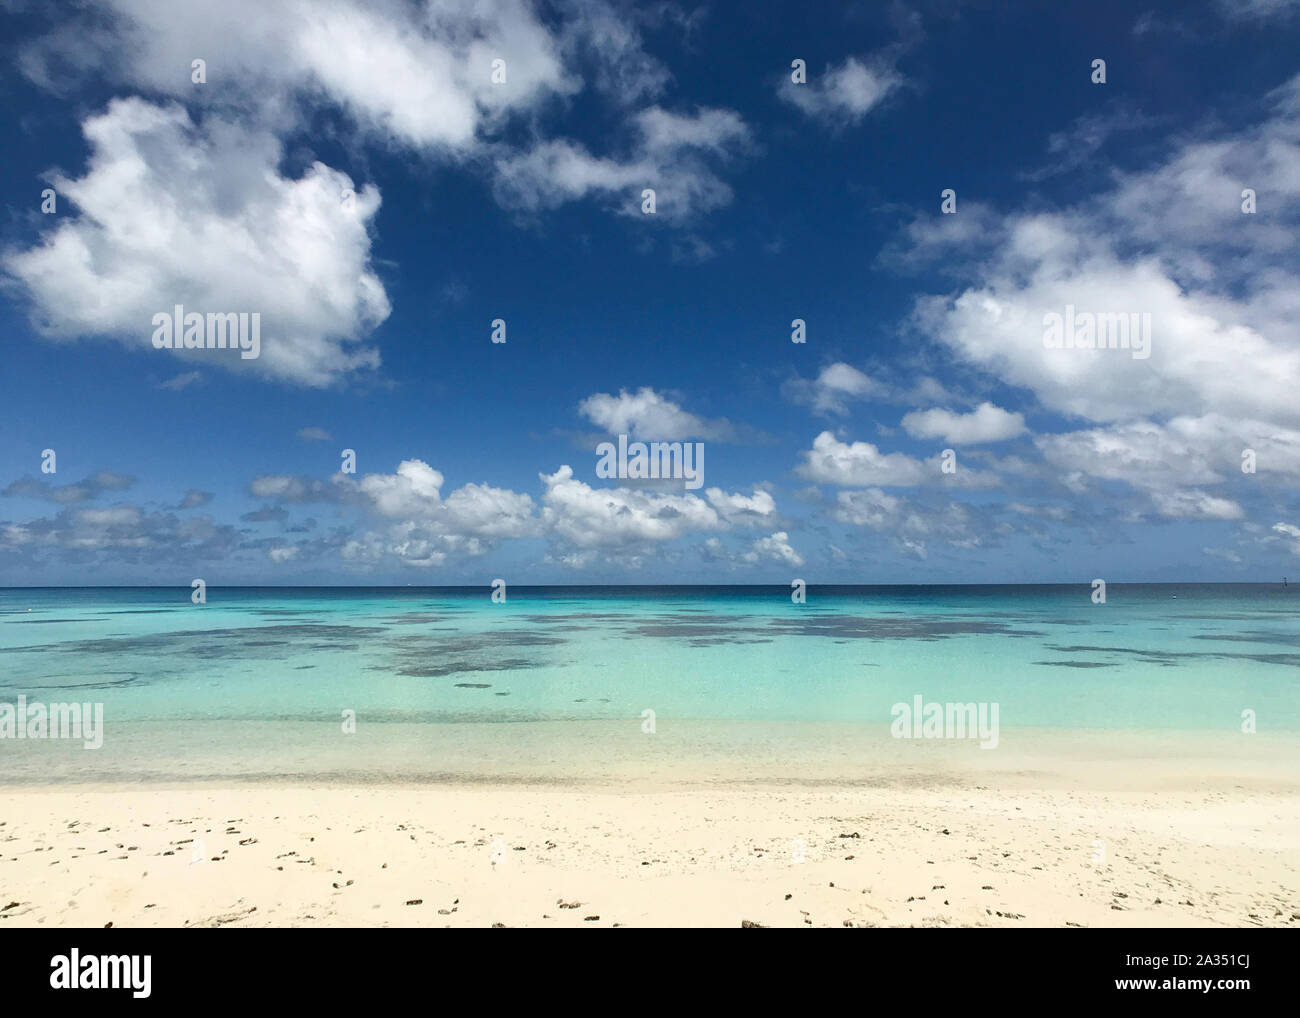 A white sandy beach leads into a turquoise lagoon under a bright blue sky with clouds and copy space; background Stock Photo